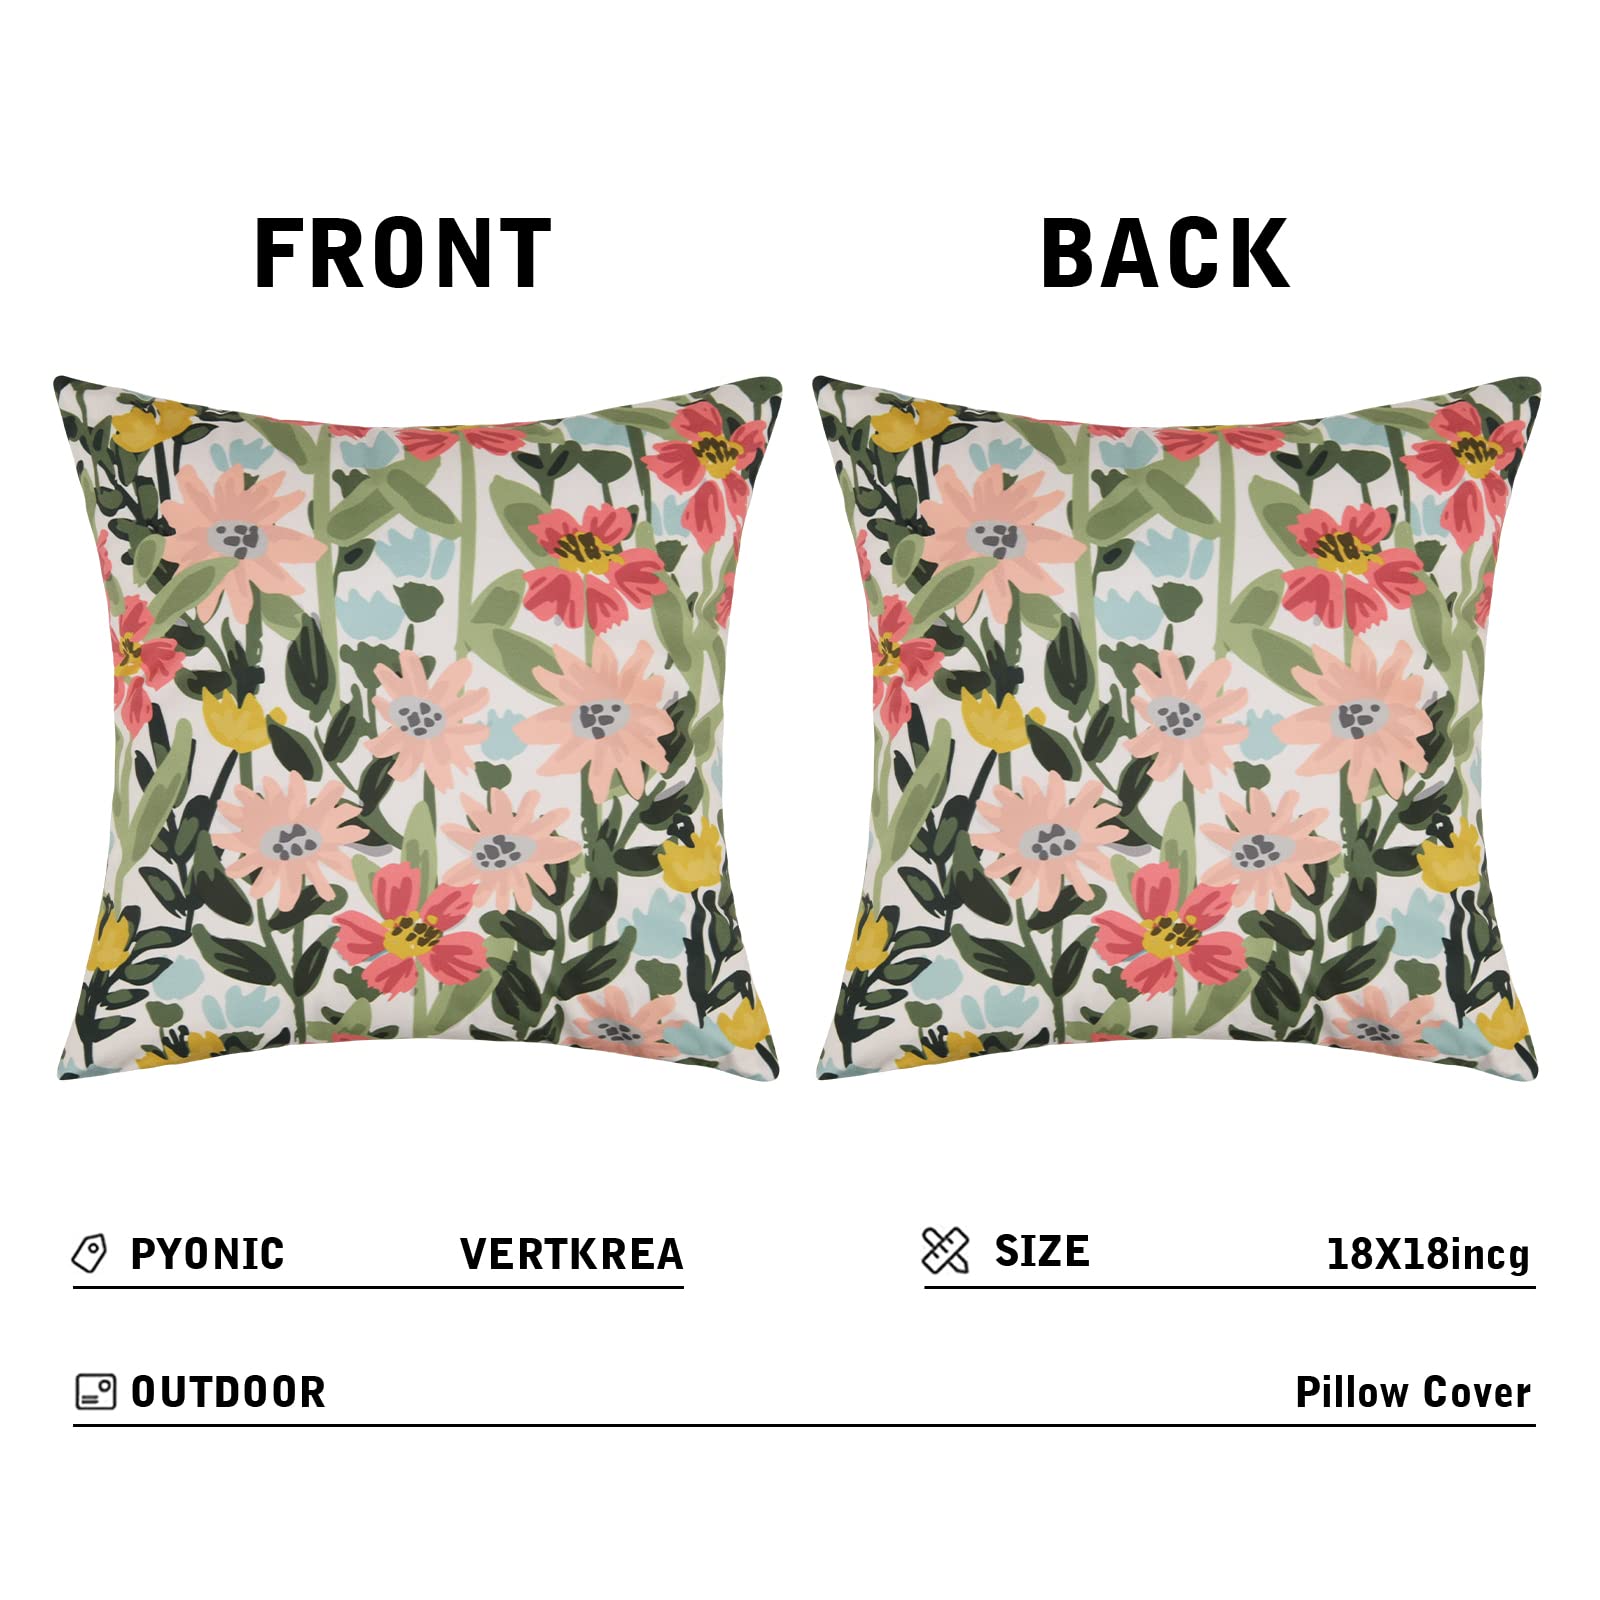 Pyonic Outdoor Pillows Cover Pack of 2 Floral Waterproof Throw Pillow Covers 18X18 inch Outdoor Pillows for Patio Furniture Garden Square Outdoor Waterproof Throw Pillows